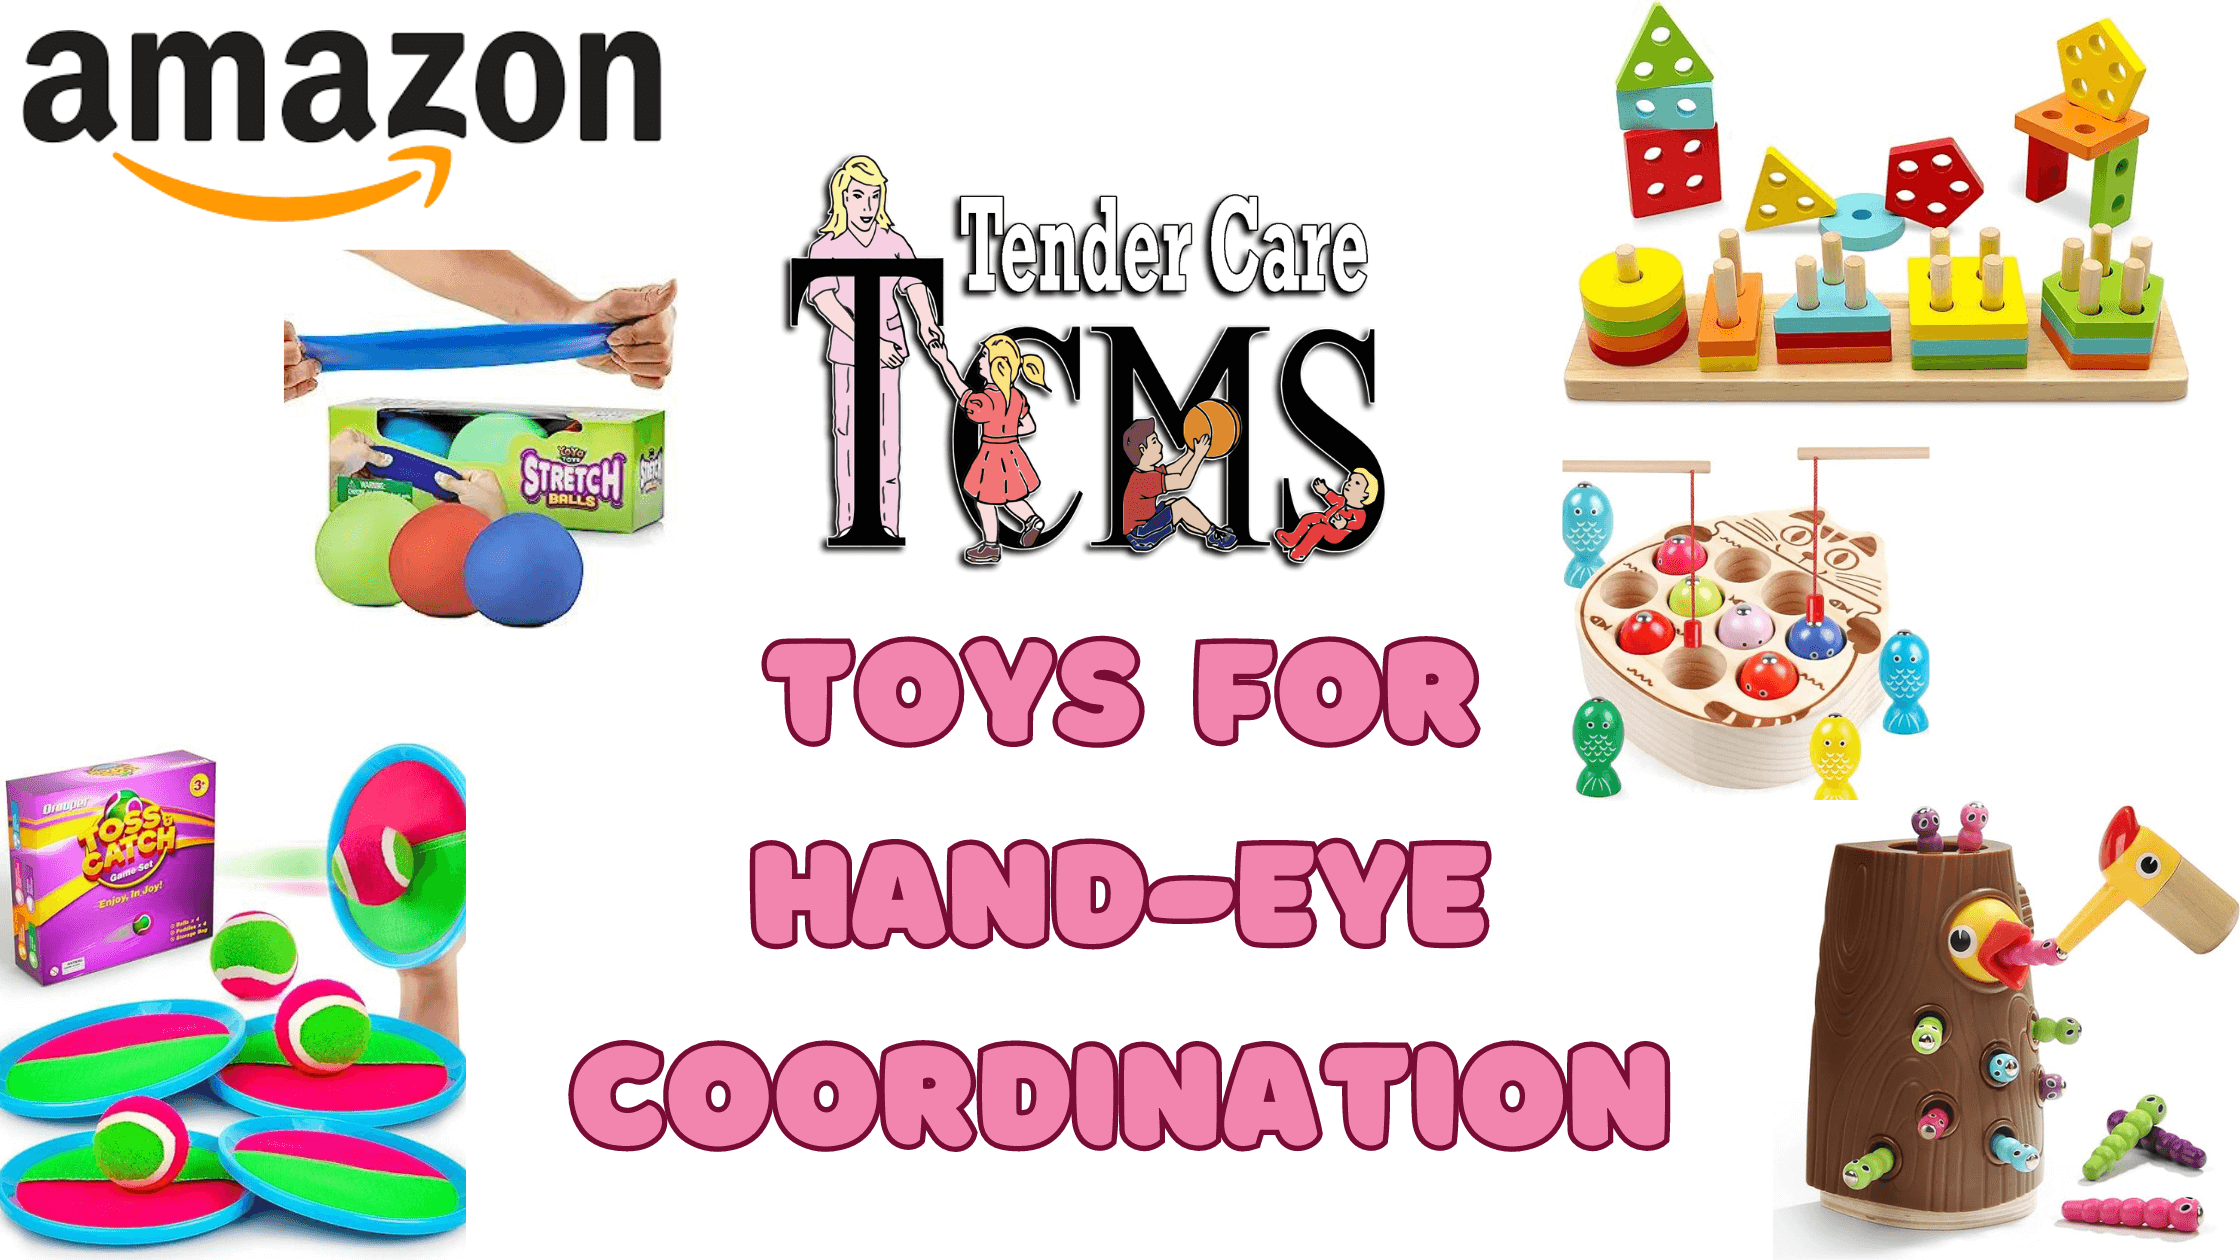 Toys for hand-eye coordination